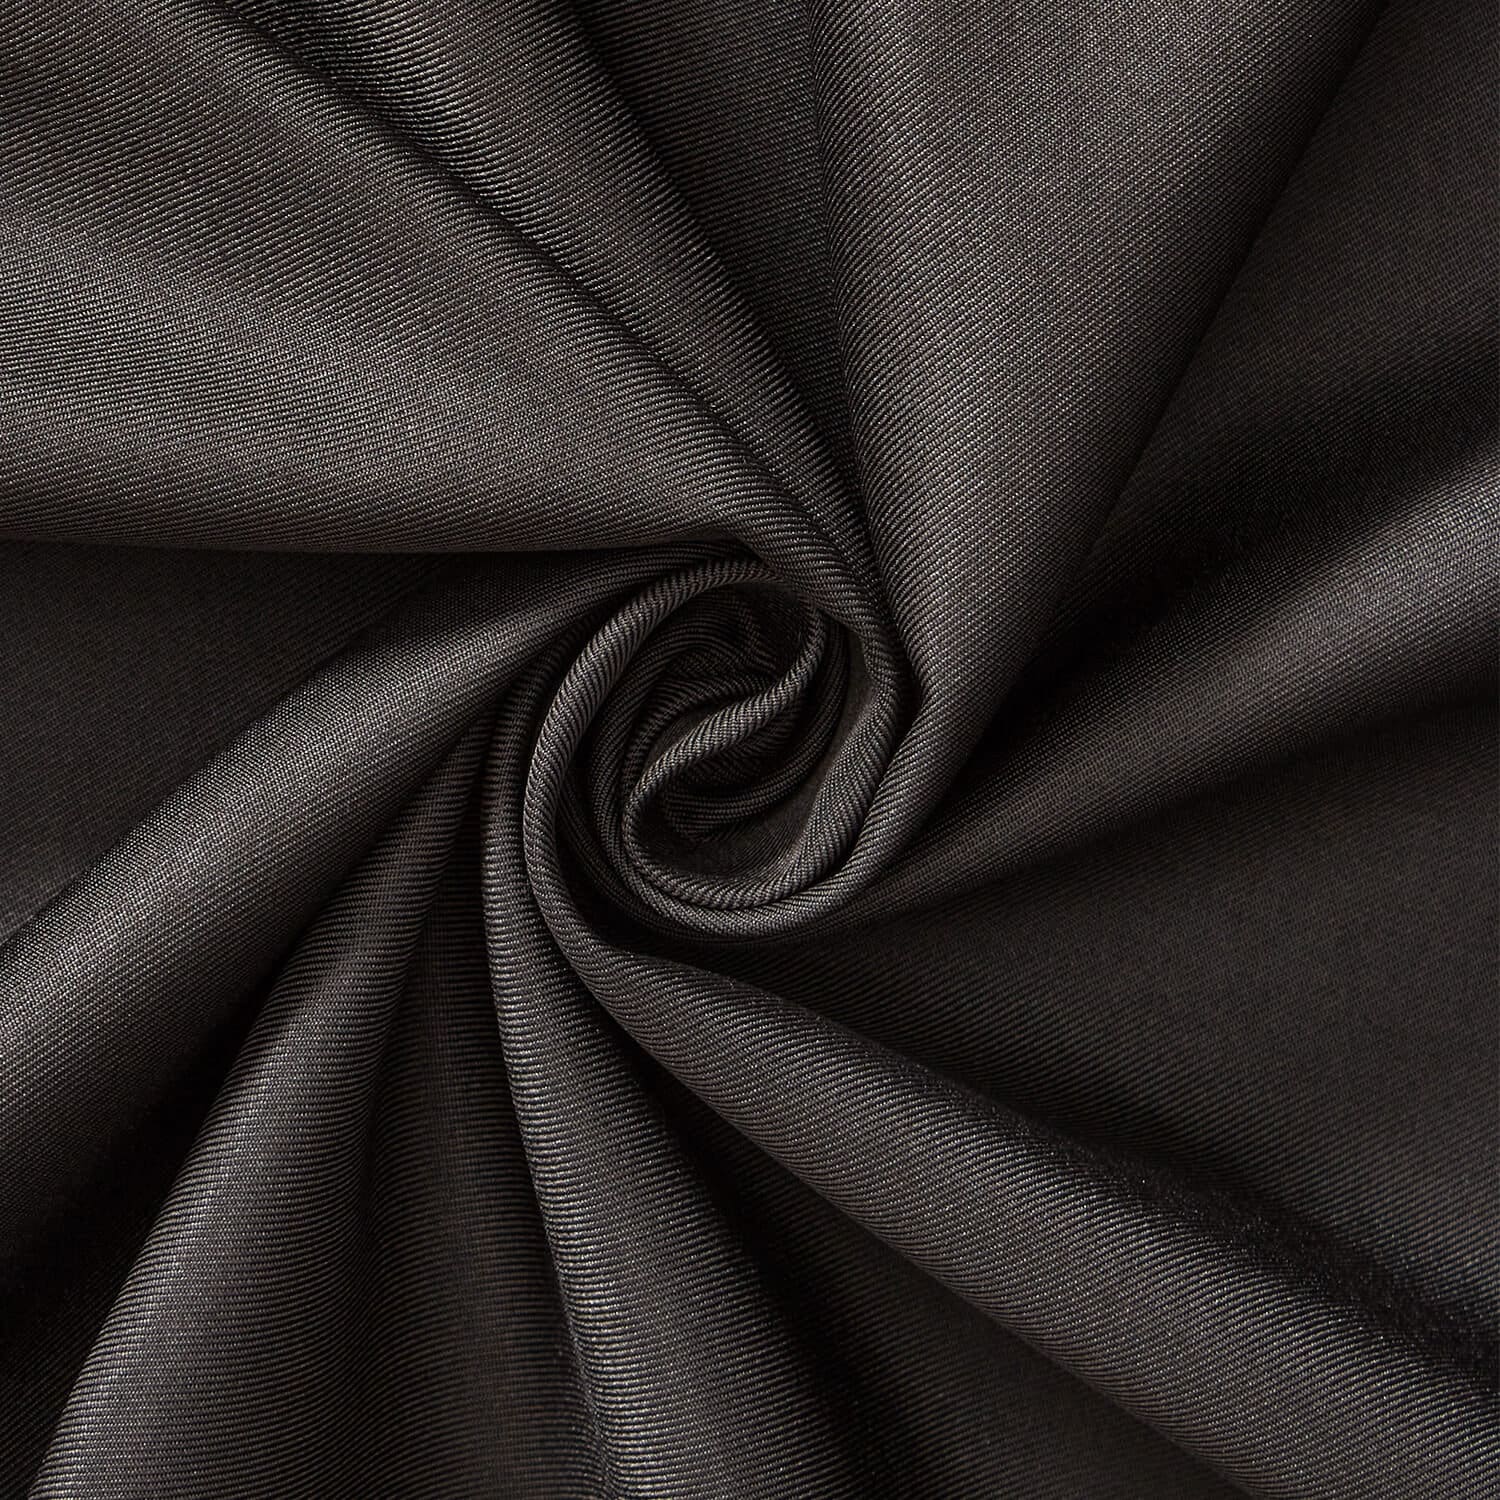 Woven Polyester Lining Fabric - 2.7 oz - Black - 58/60